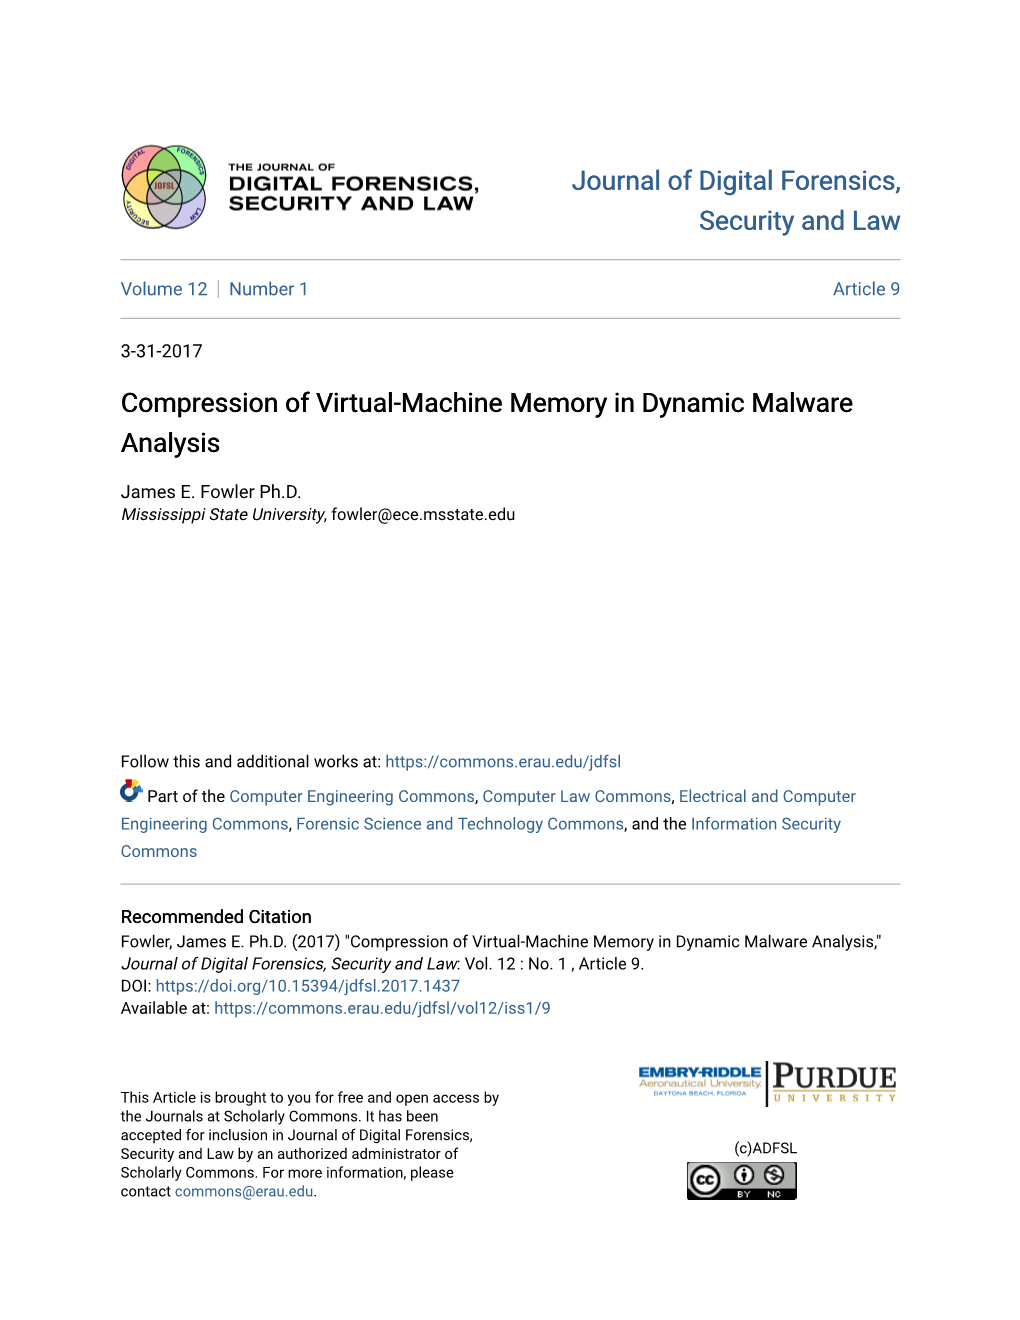 Compression of Virtual-Machine Memory in Dynamic Malware Analysis